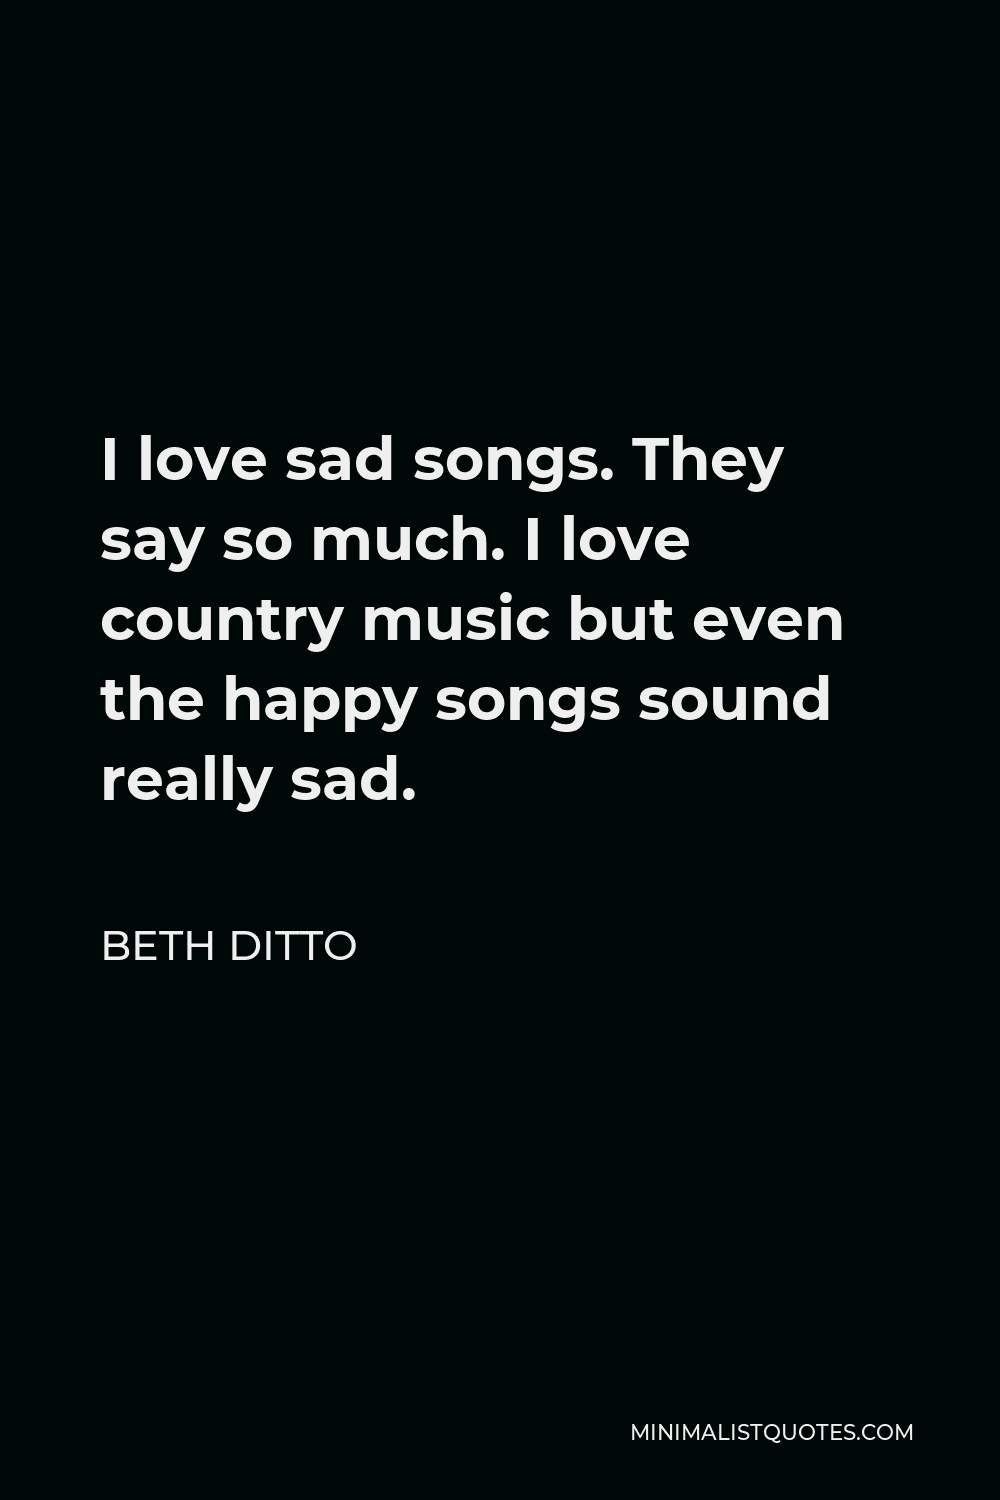 Beth Ditto Quote - I love sad songs. They say so much. I love country music but even the happy songs sound really sad.